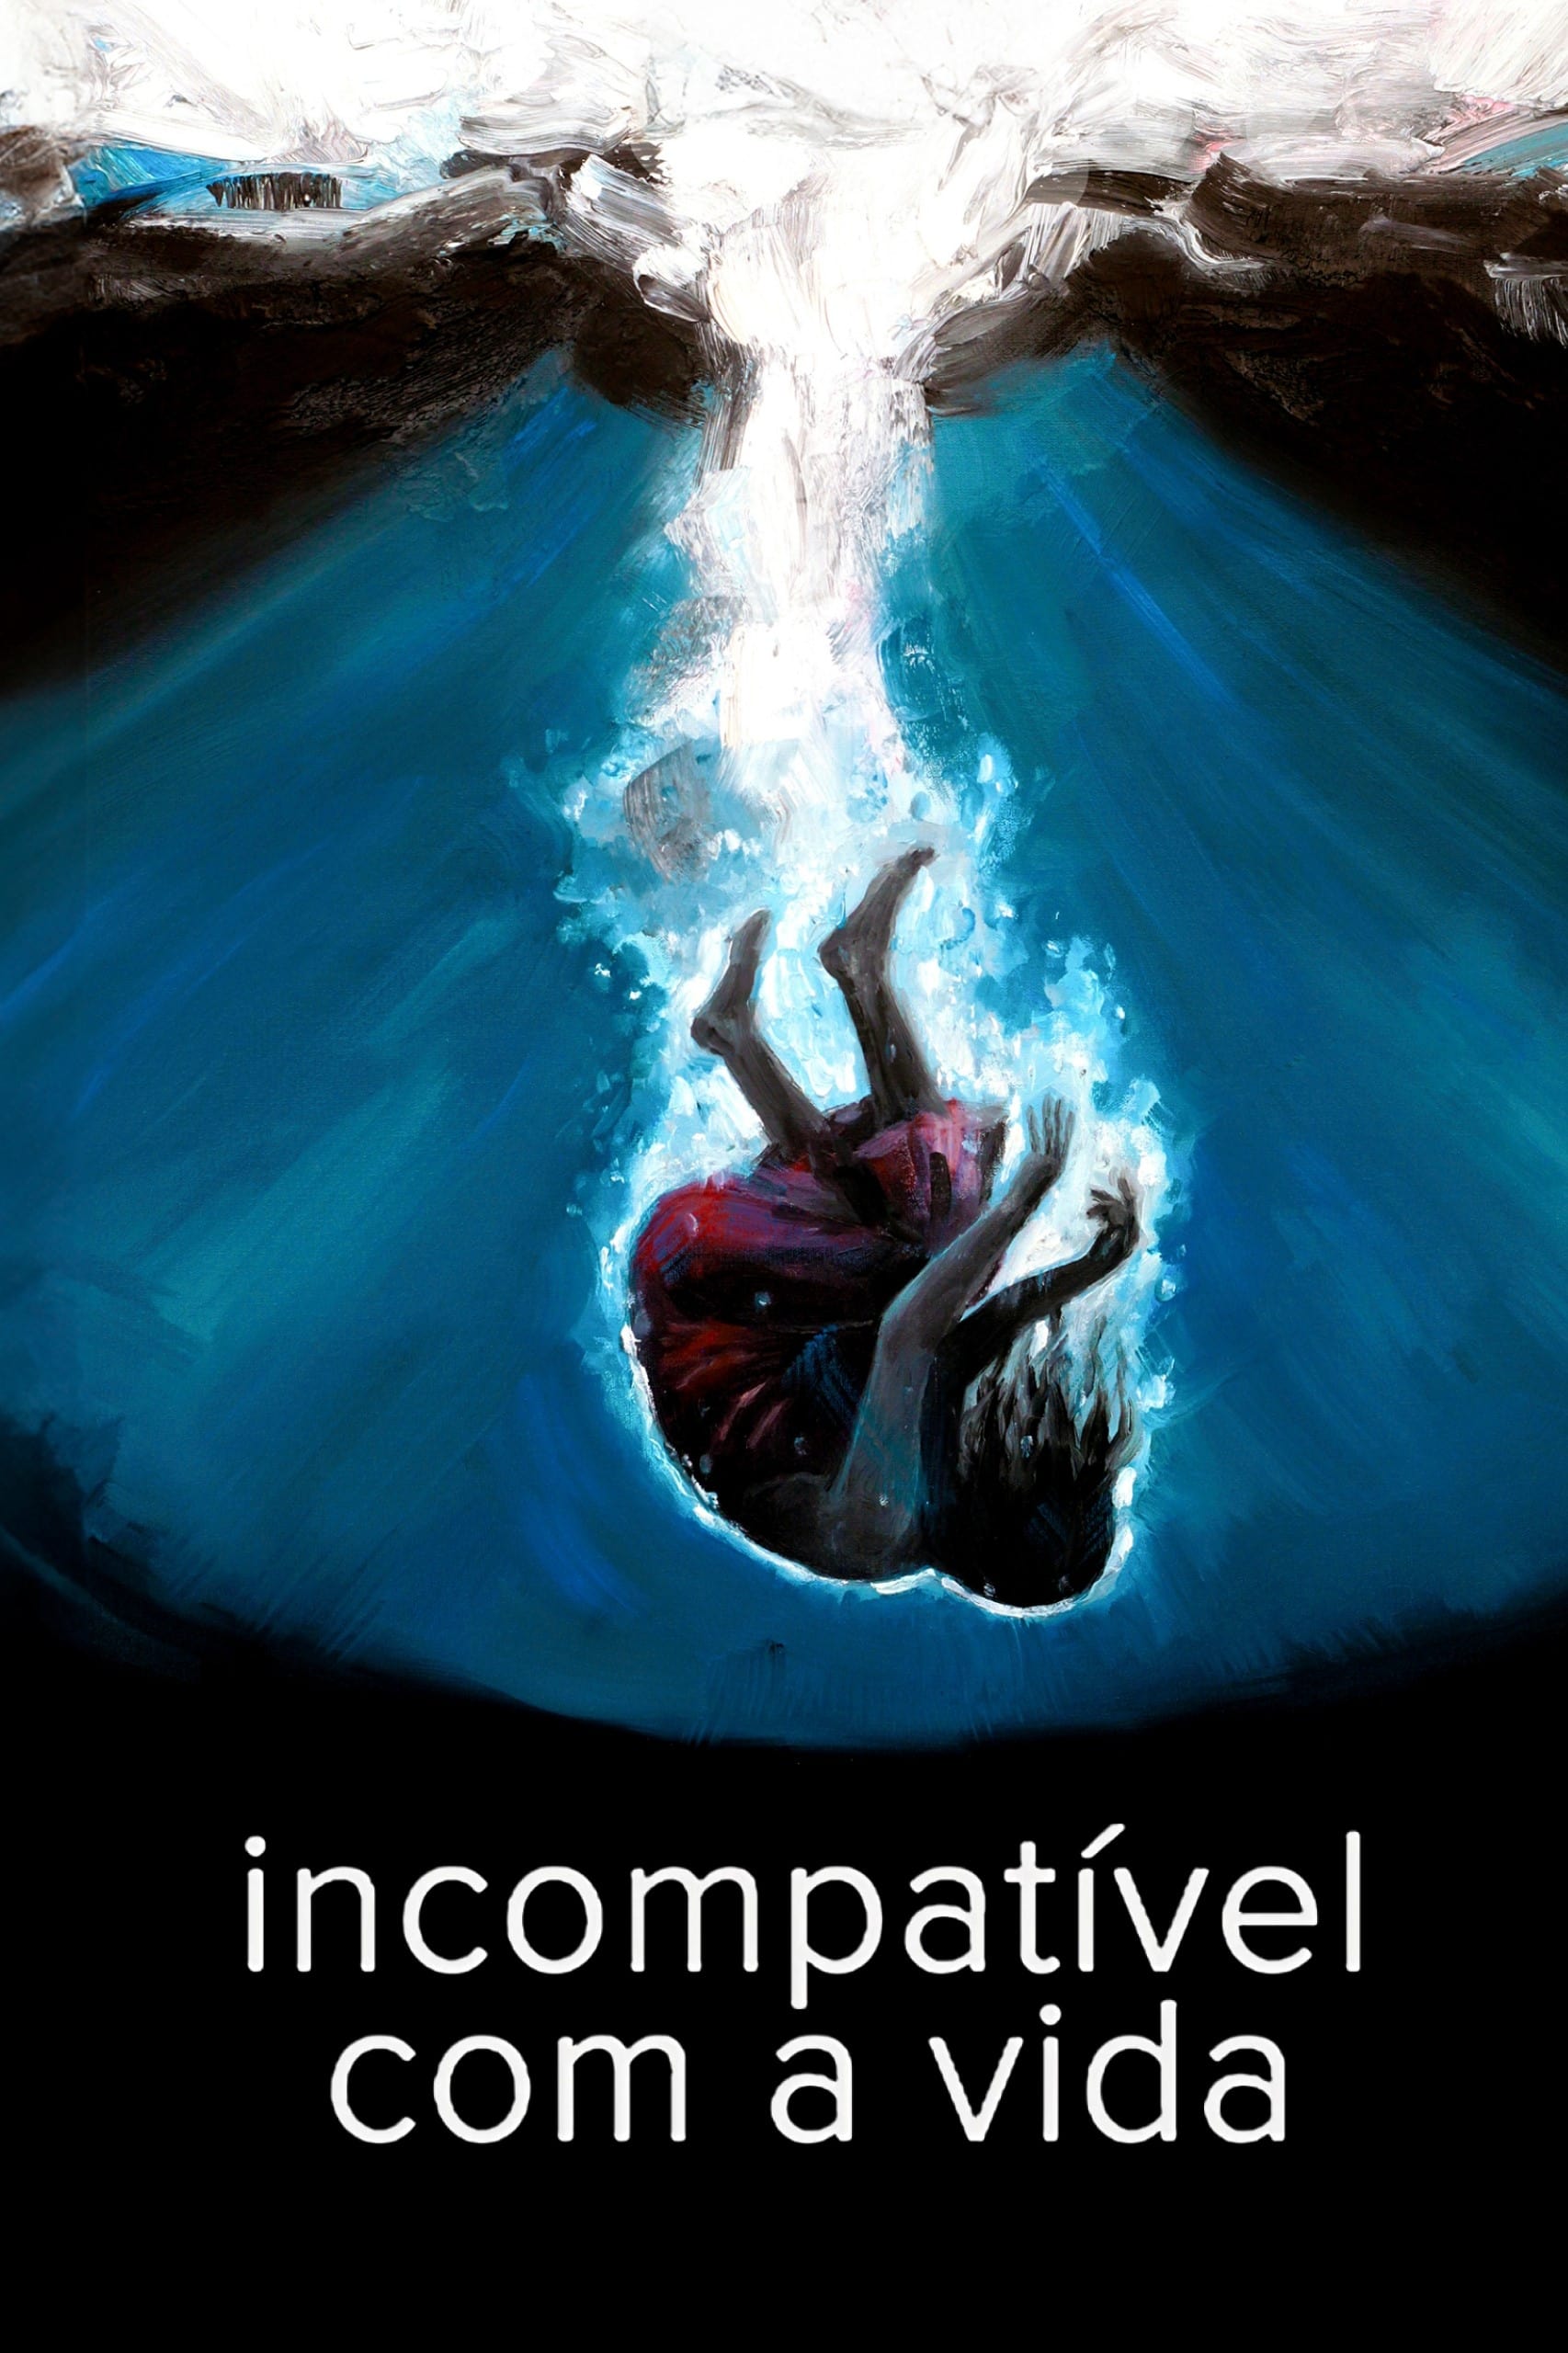 Incompatible with Life